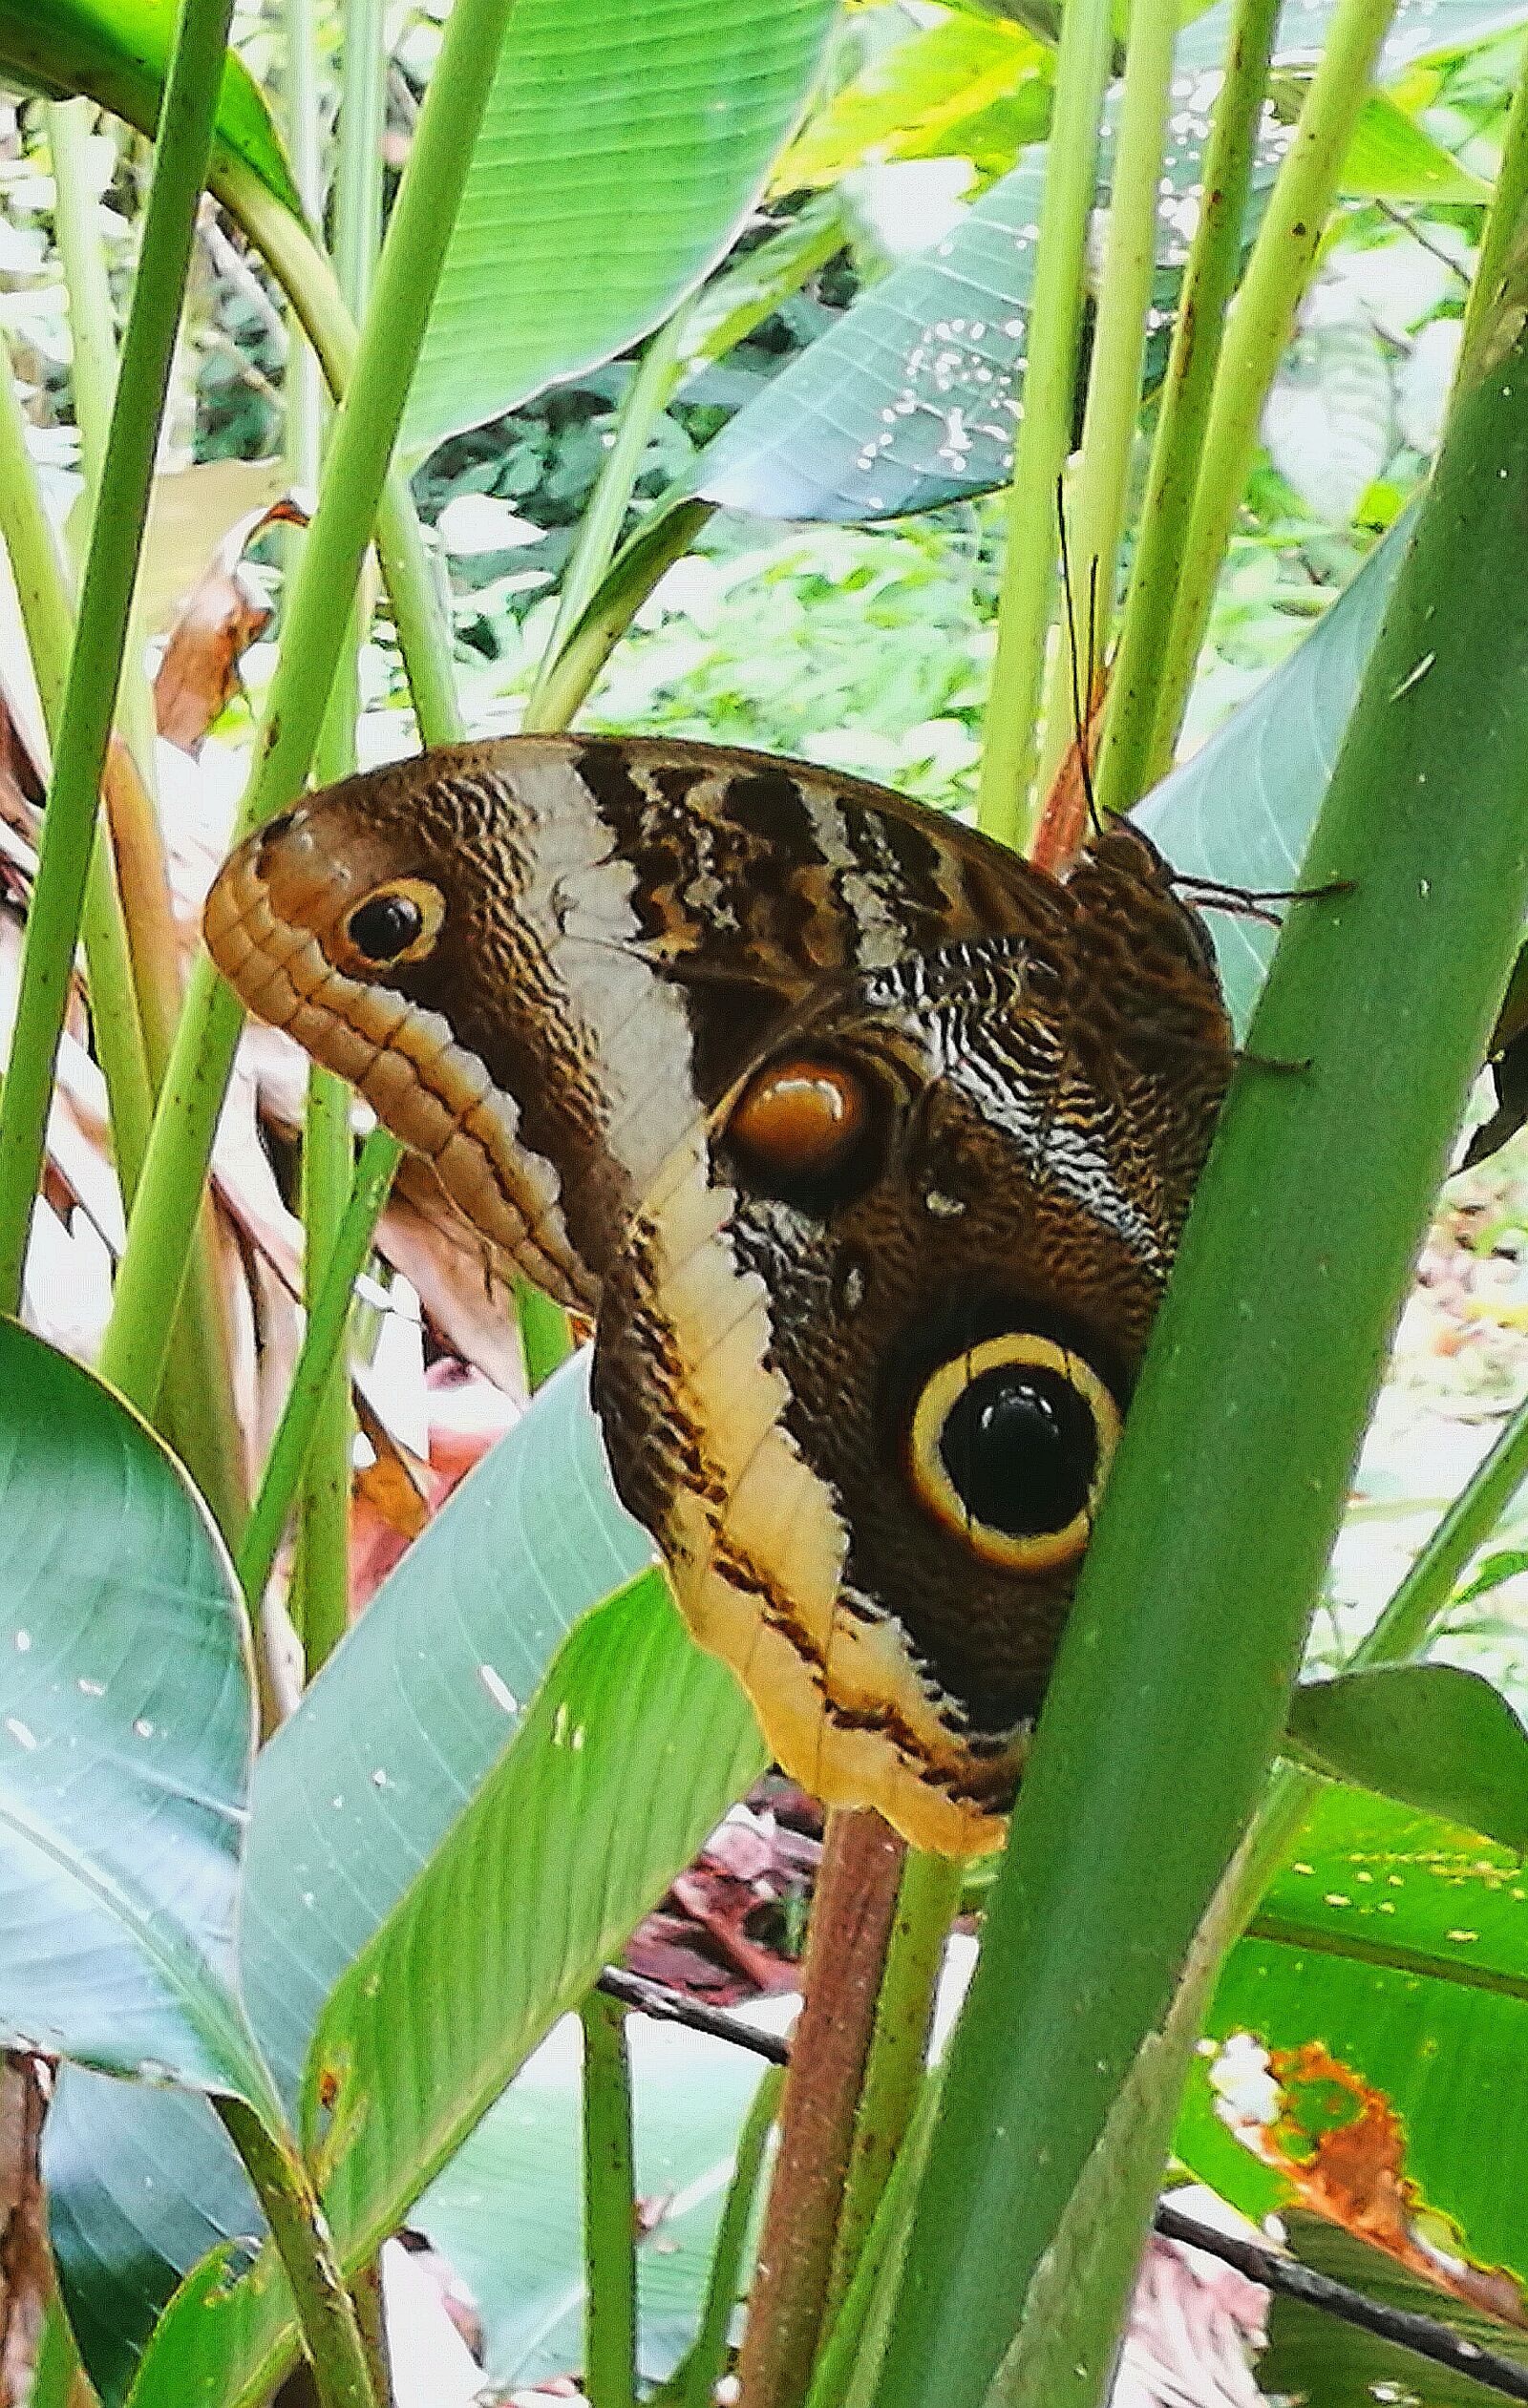 HUAWEI P9 Plus sample photo. Butterfly, nature, insect photography